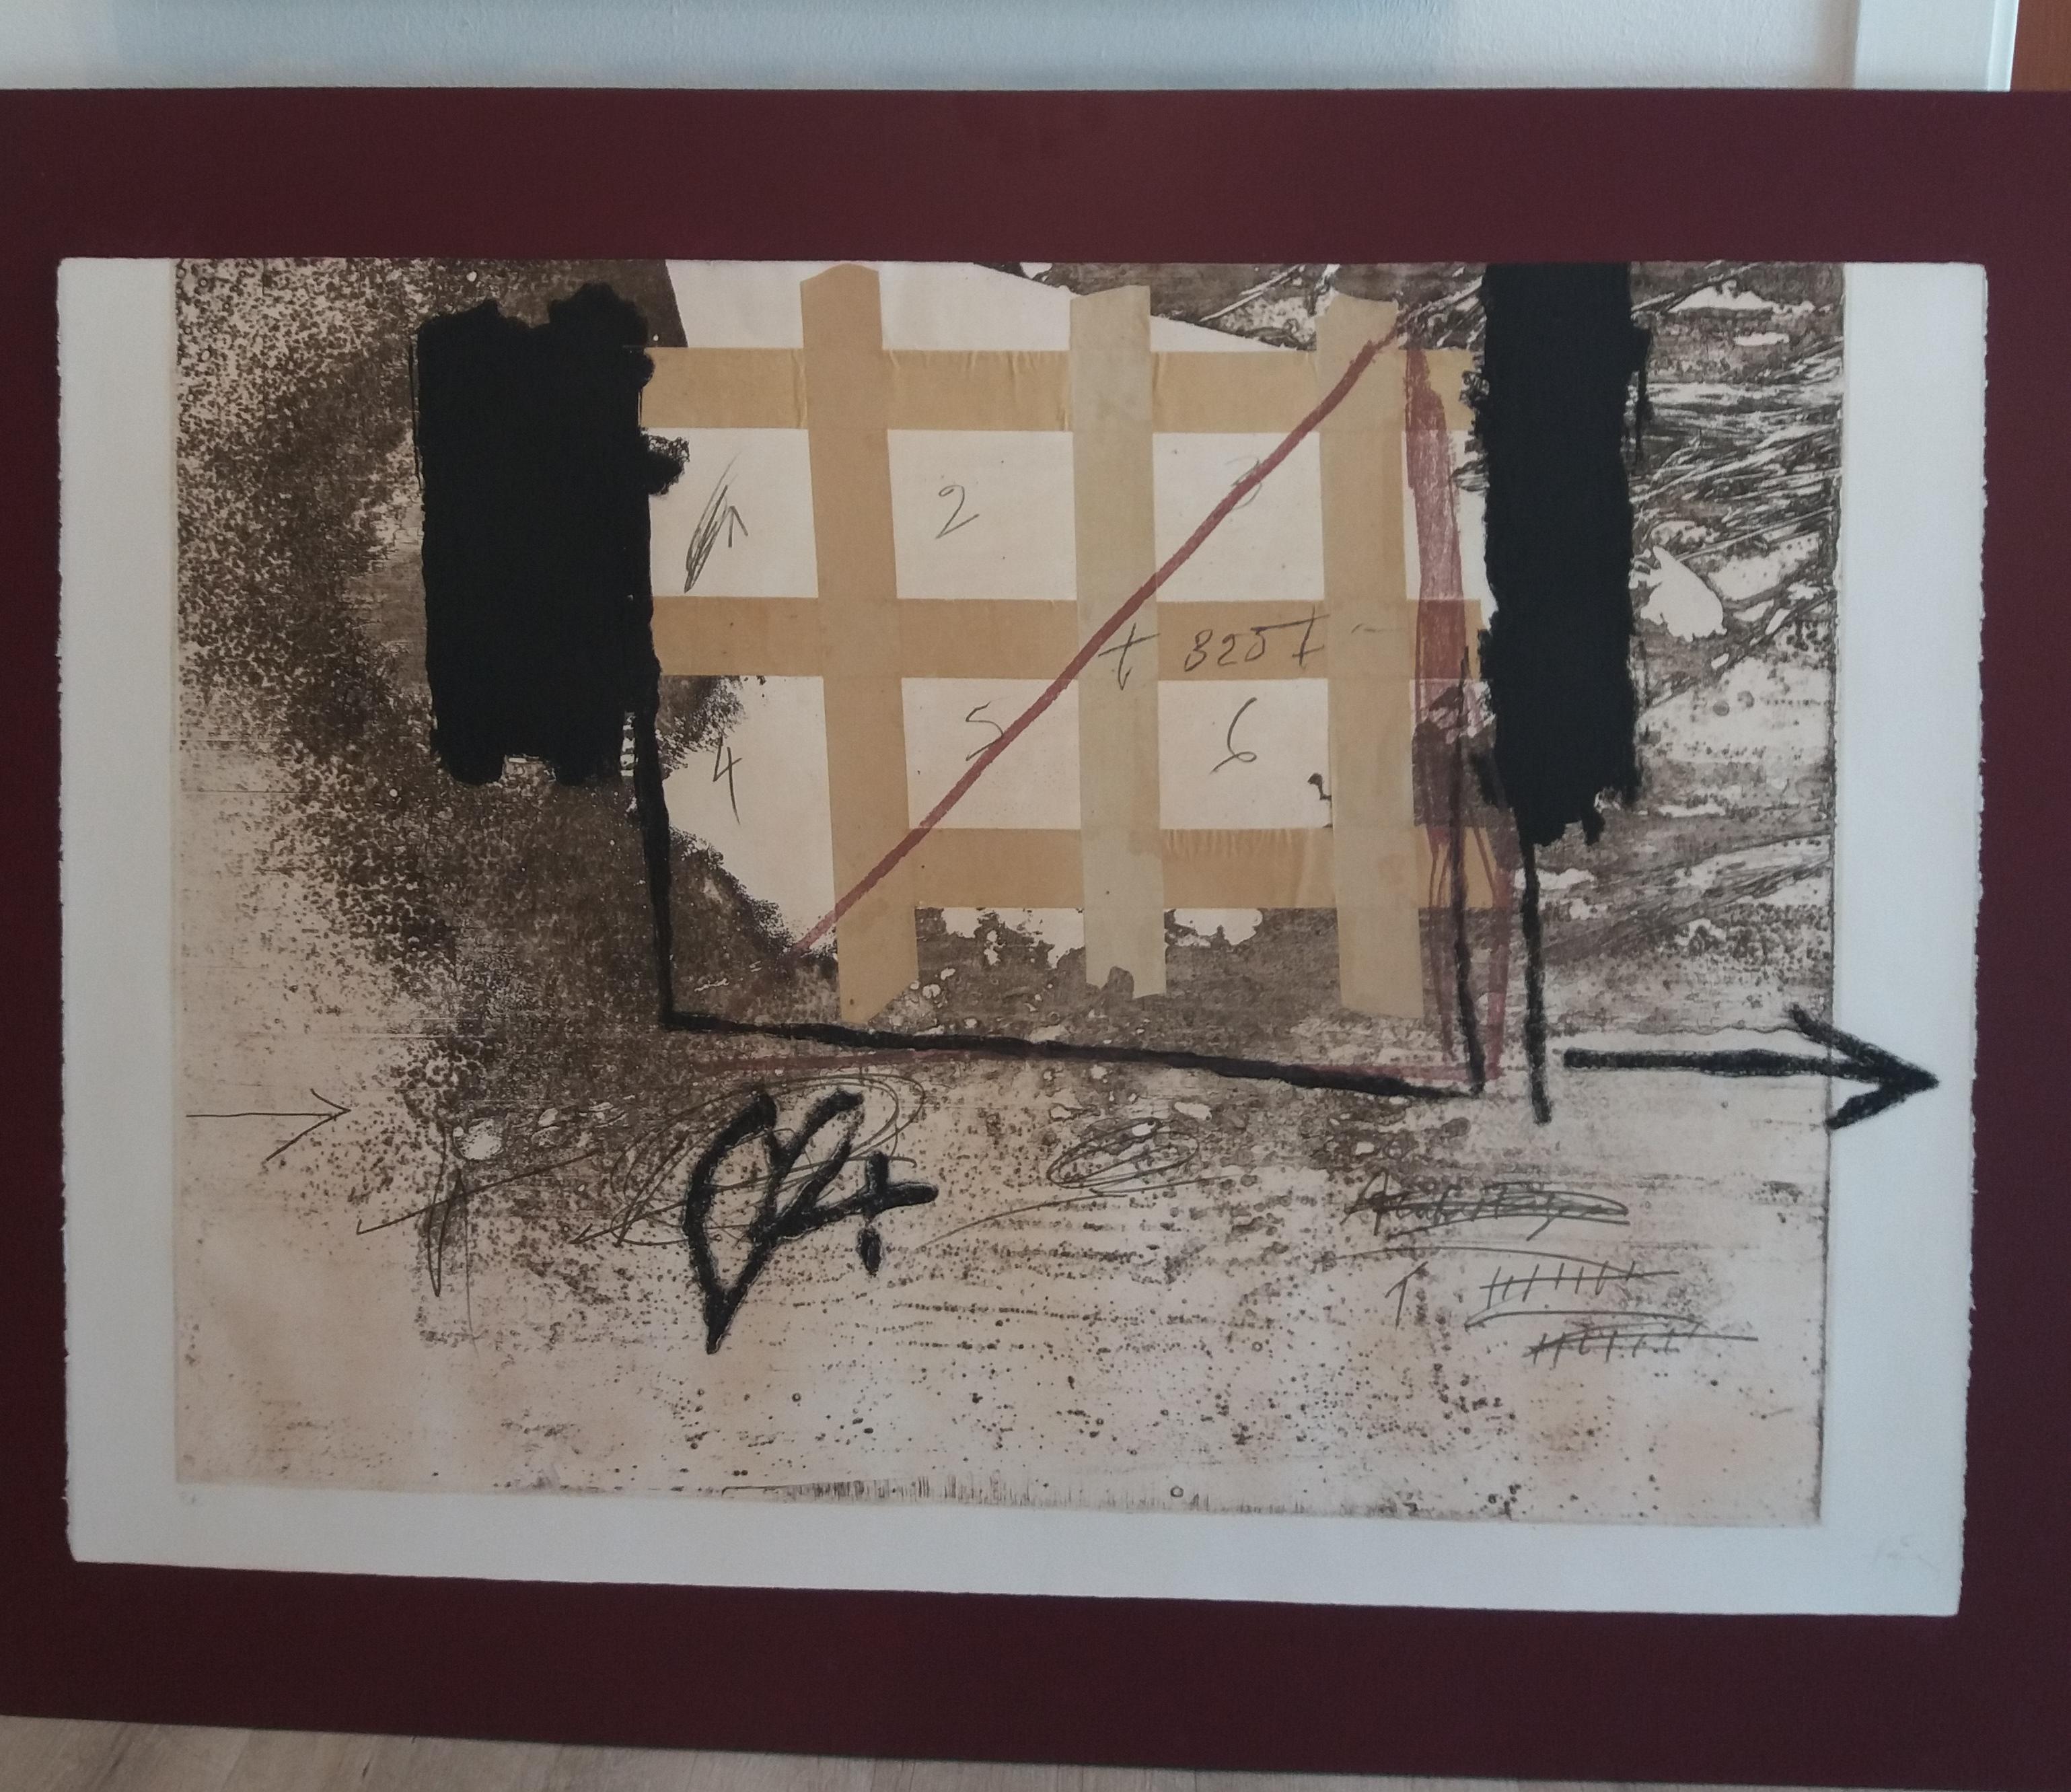  engraved with plastic collage and polychrome stamping abstract pàinting.
Aguatinta. Arches 63x90
Ed galeria Maeght, Barceloa. Imp. J. Barbara, Barcelona
Catalogue razonne 1973/1978, pag 181
ANTONI TAPIES was the maximum representative of Spanish